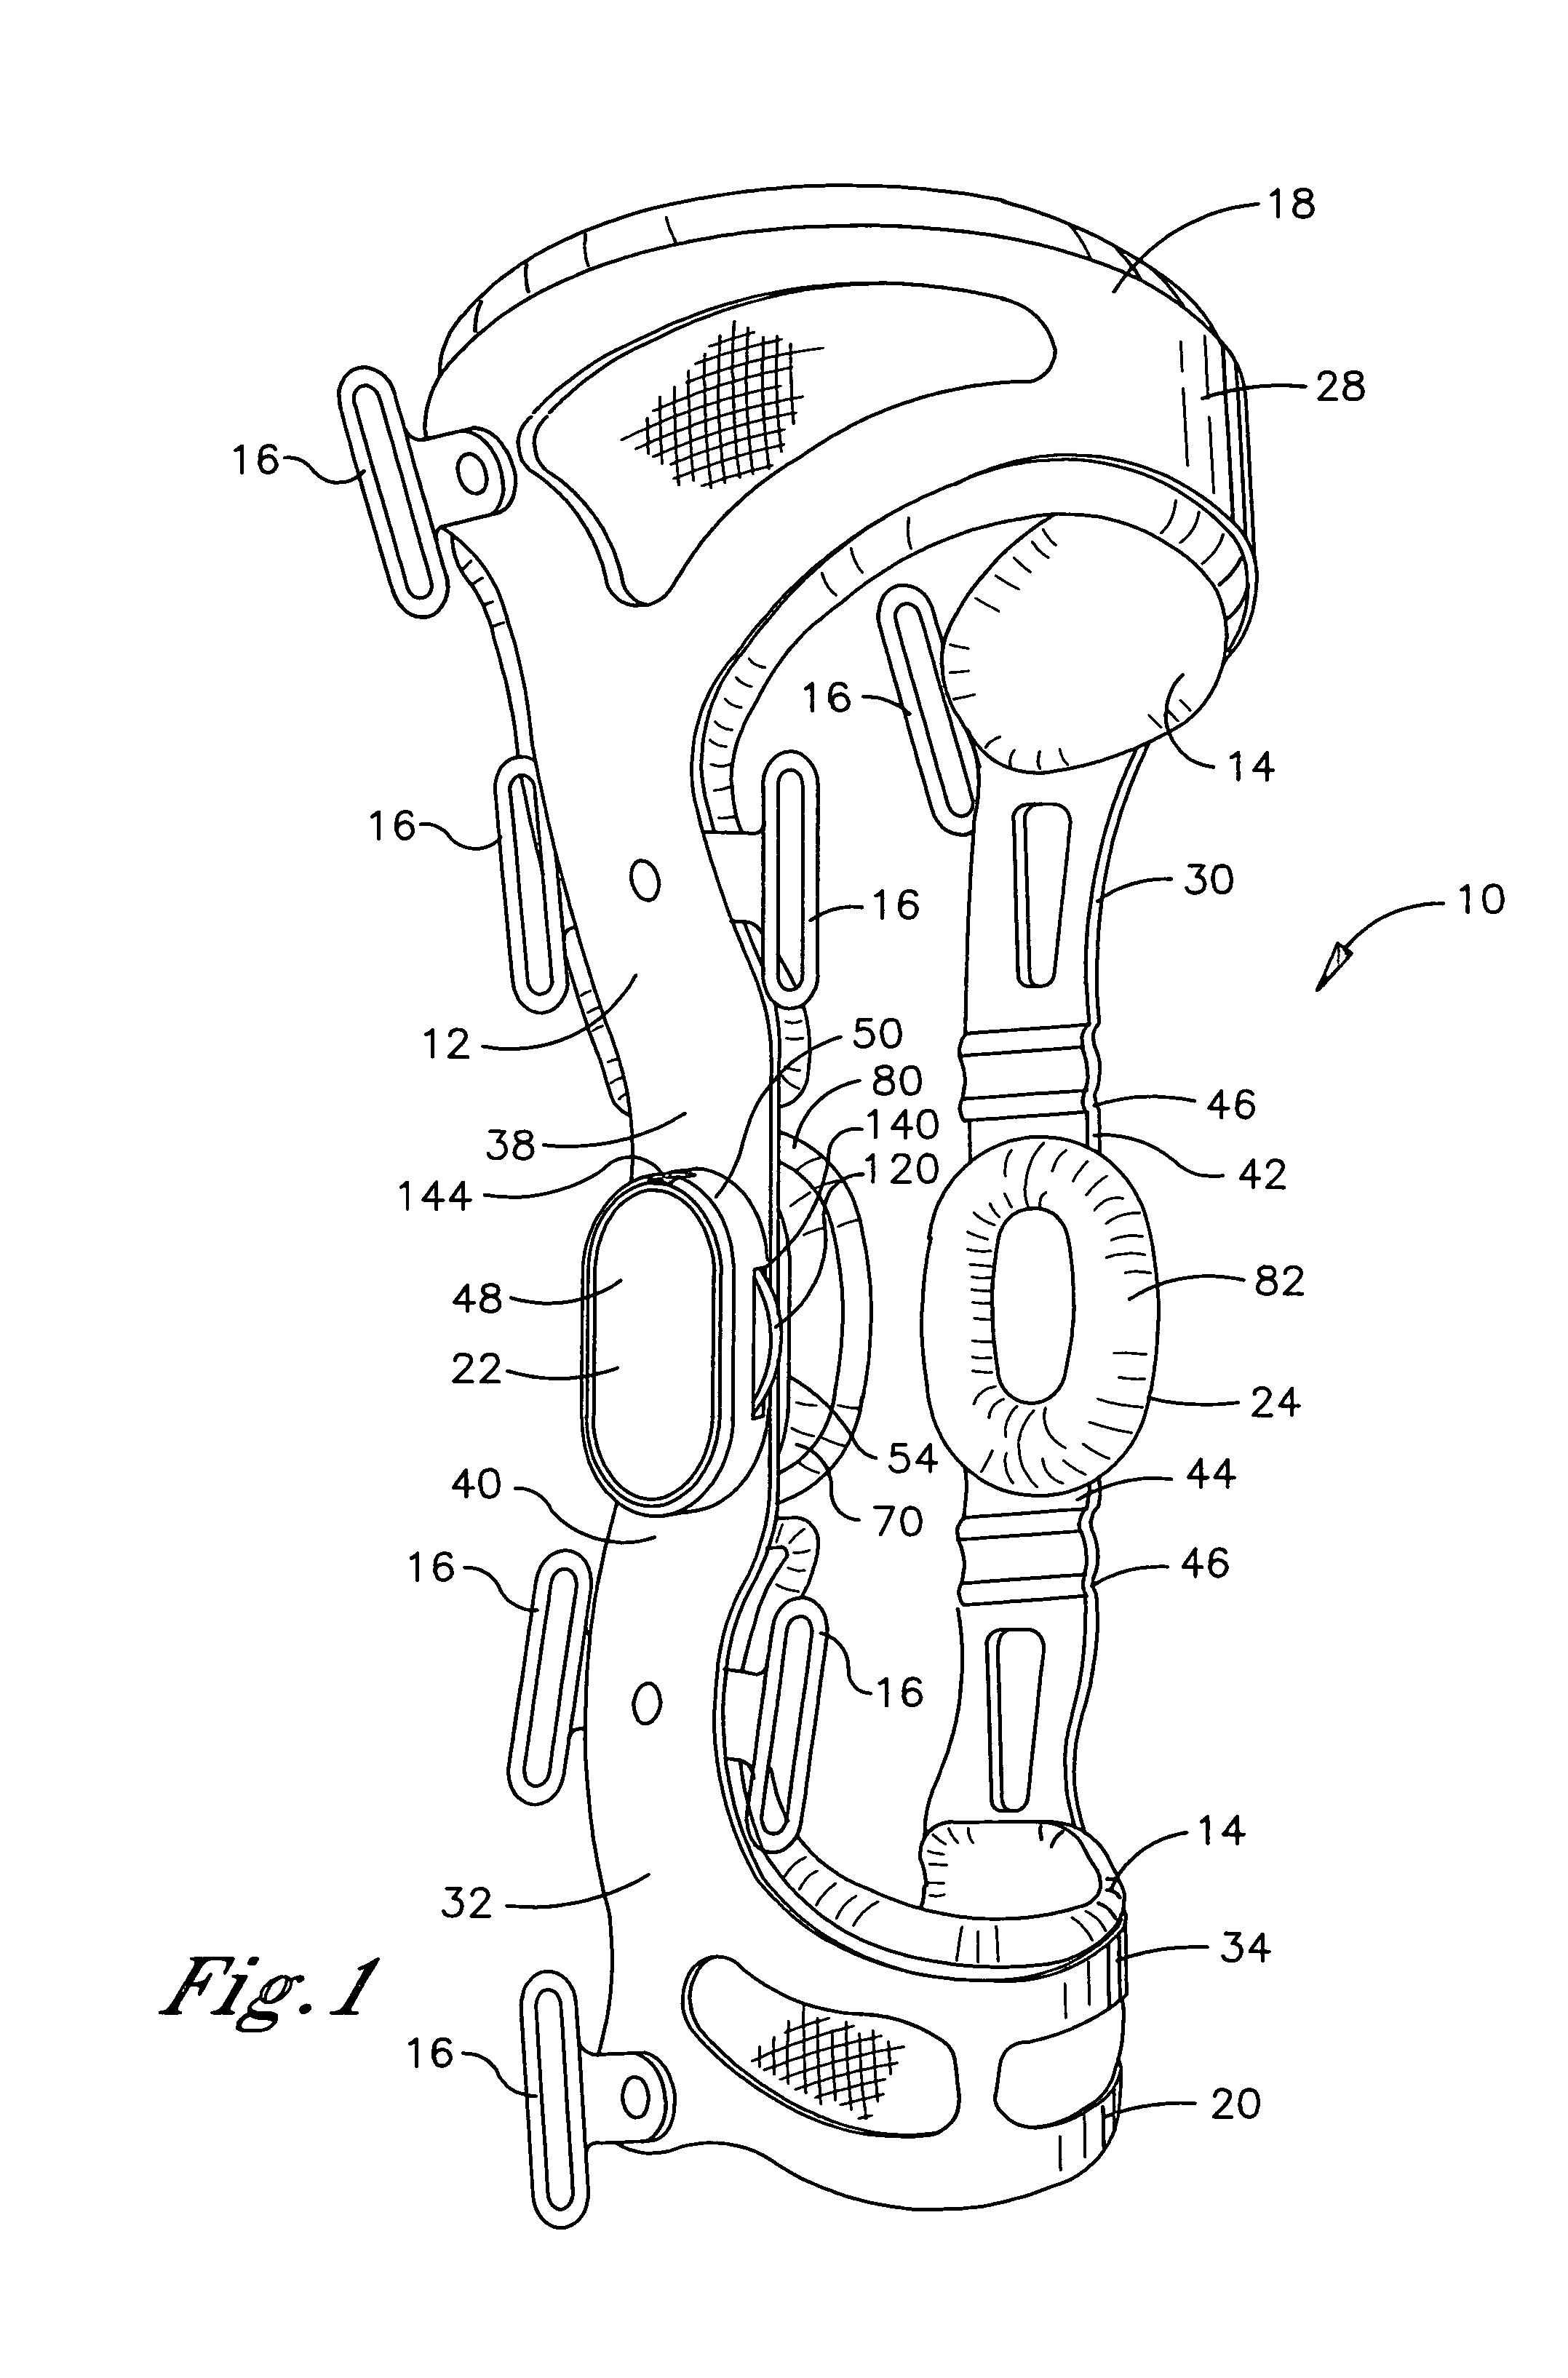 Rotational hinge assembly for a knee brace having an osteoarthritis treatment function